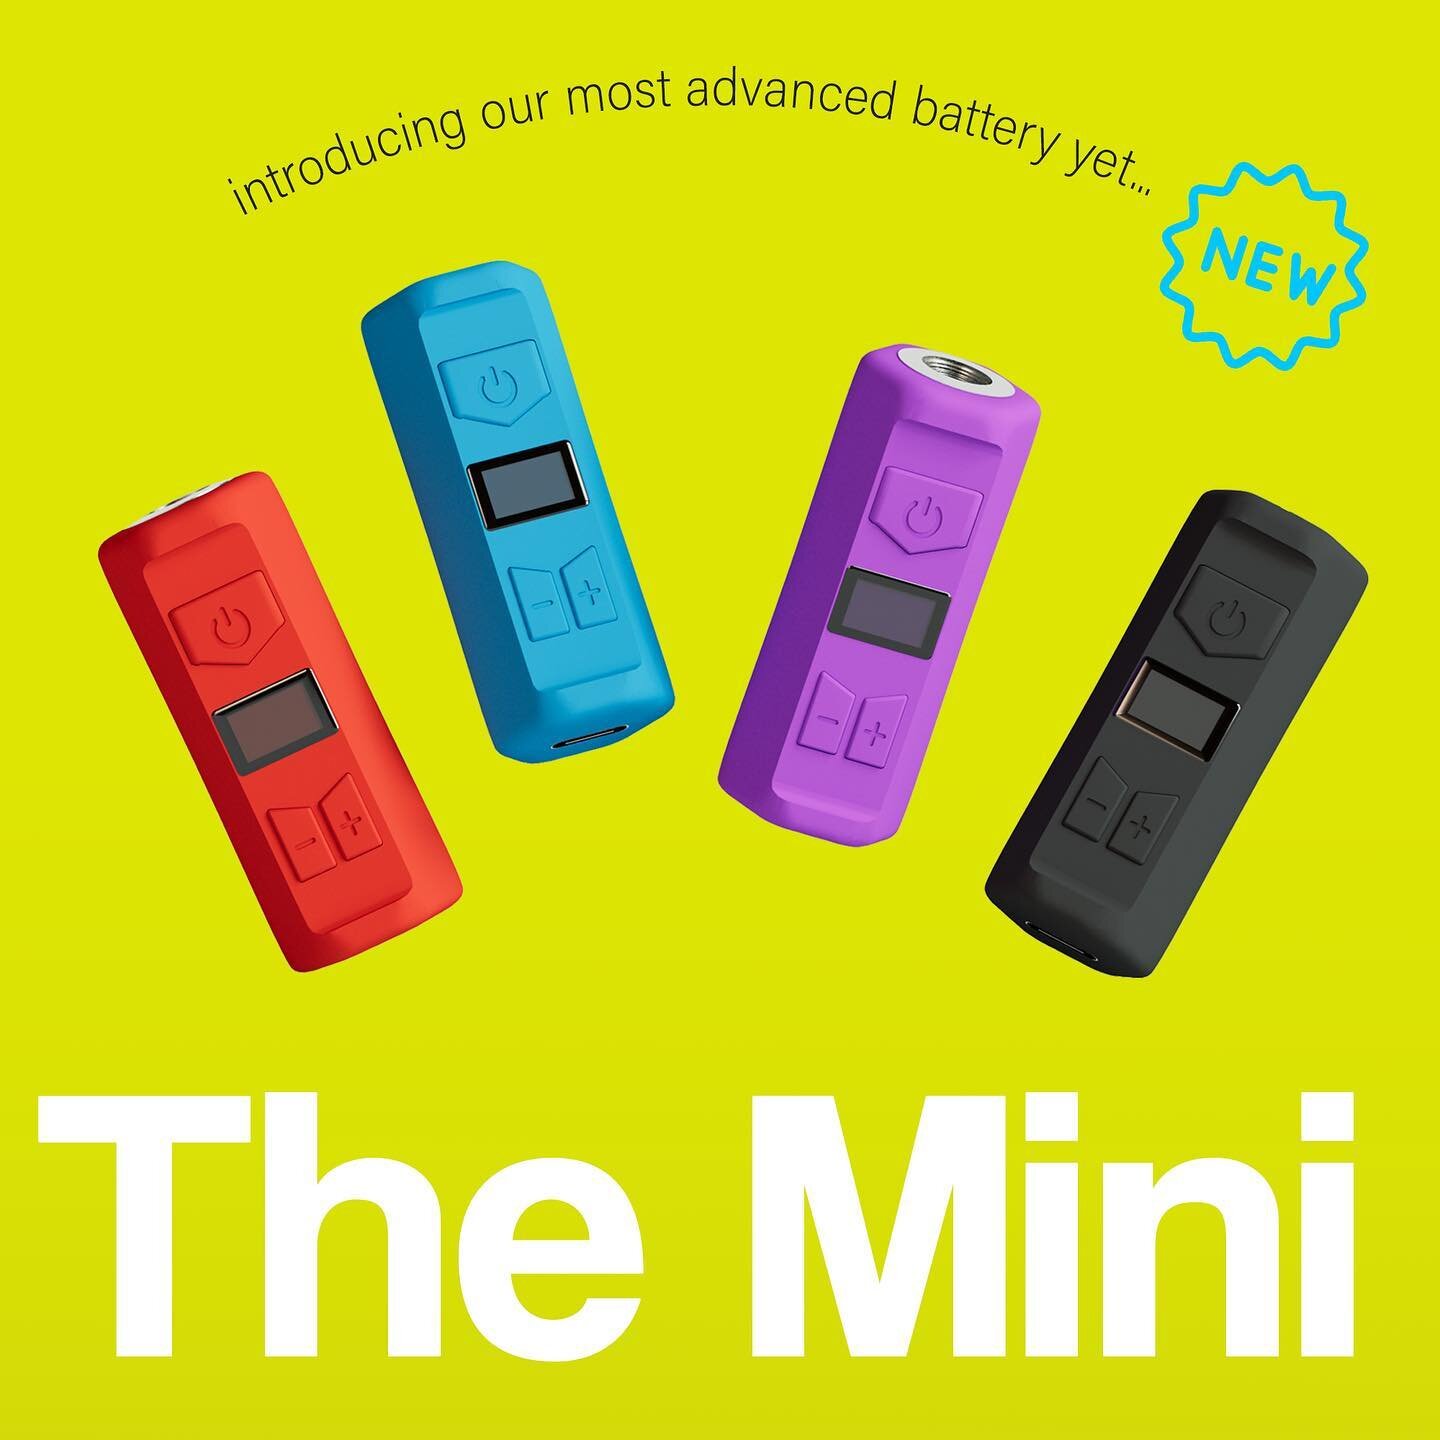 Introducing the all new, tiny yet powerful, Mini Battery! 
This advanced + compact battery features a brand new digital display for even more user customization options including a wider range of heat settings and a faster pre-heat function. Availabl